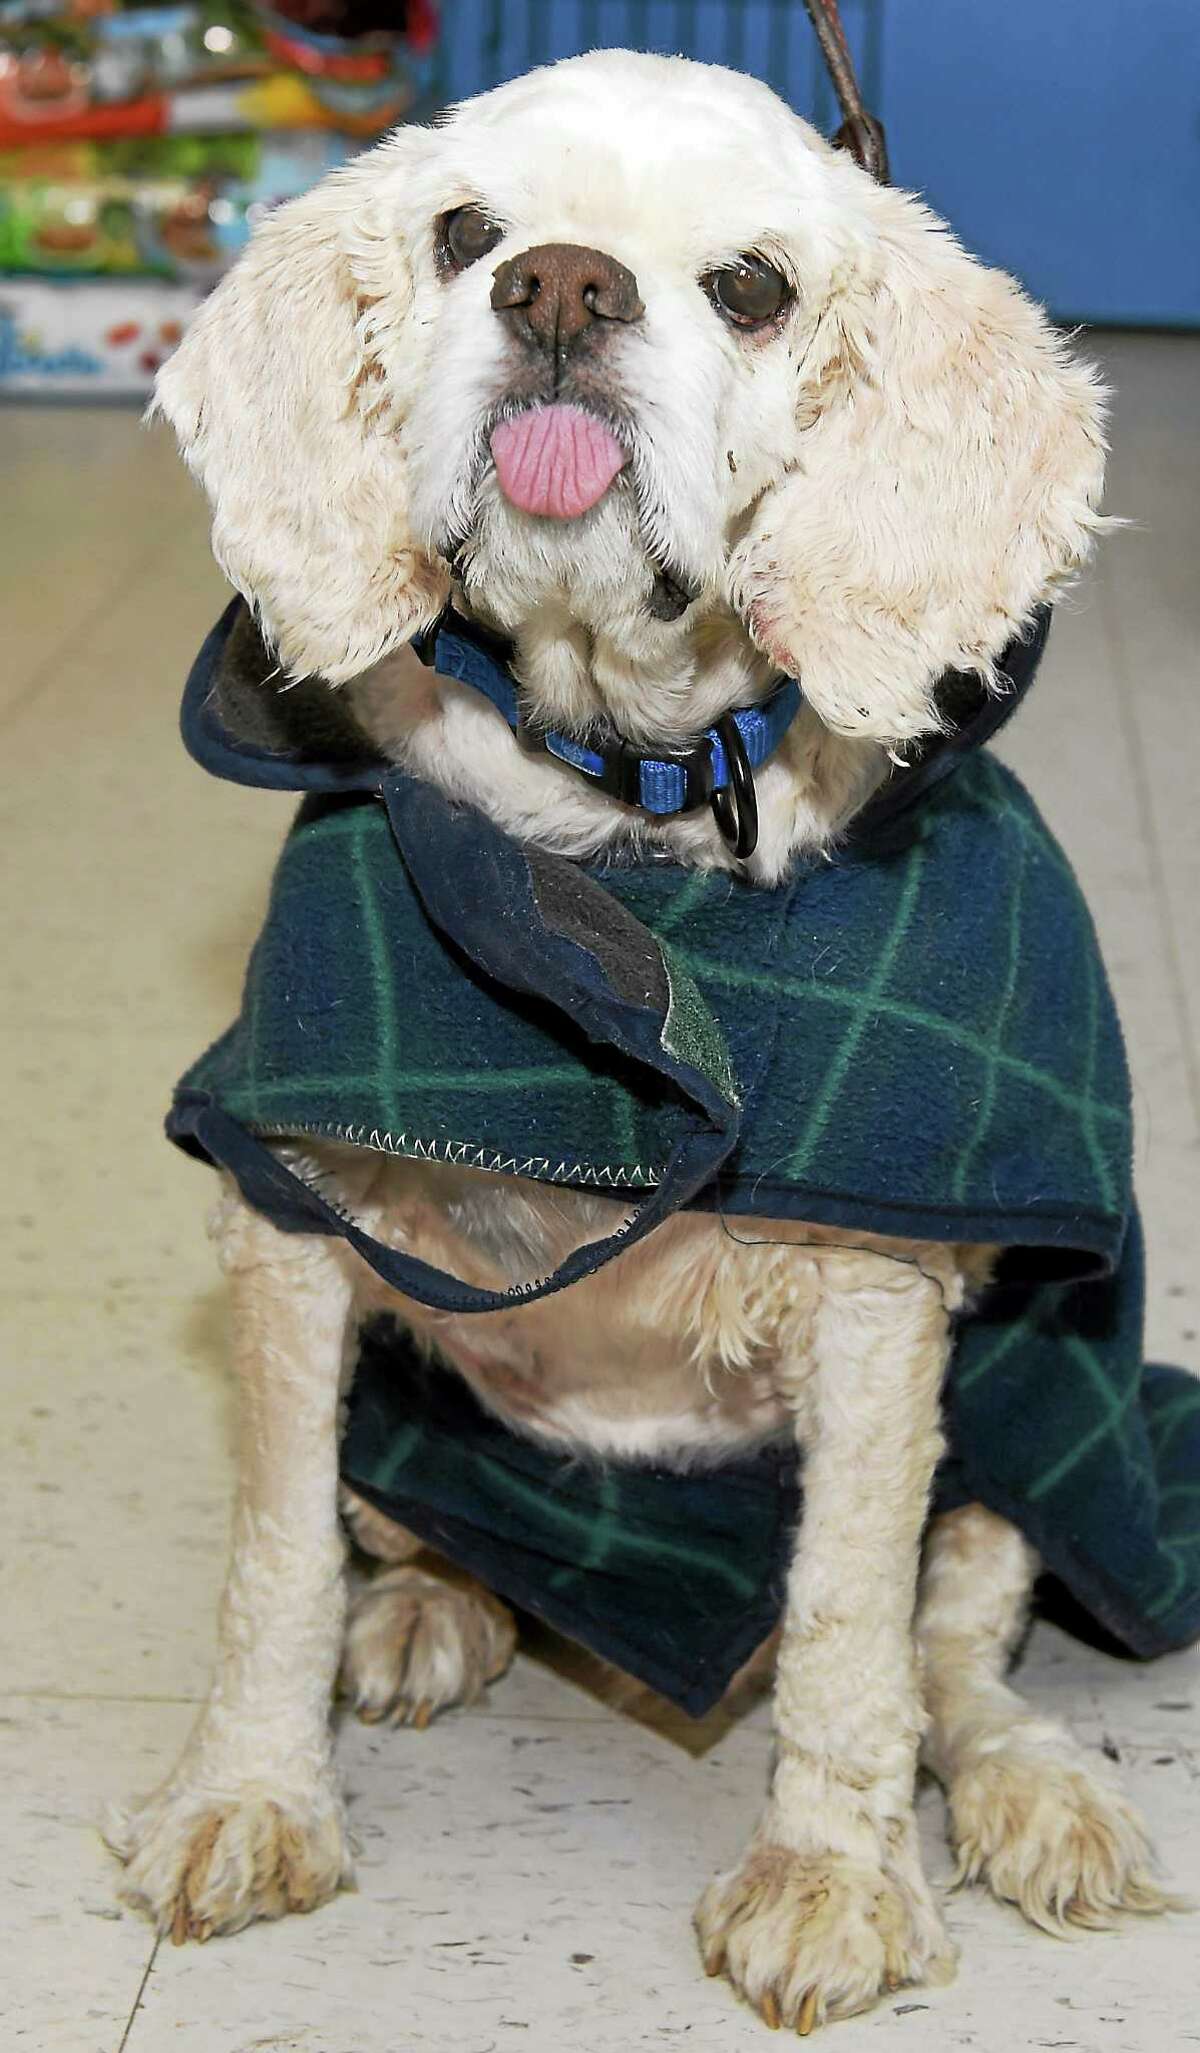 Chance, a 10-year-old special needs dog, is available for adoption at the Dan Cosgrove Animal Shelter in Branford.